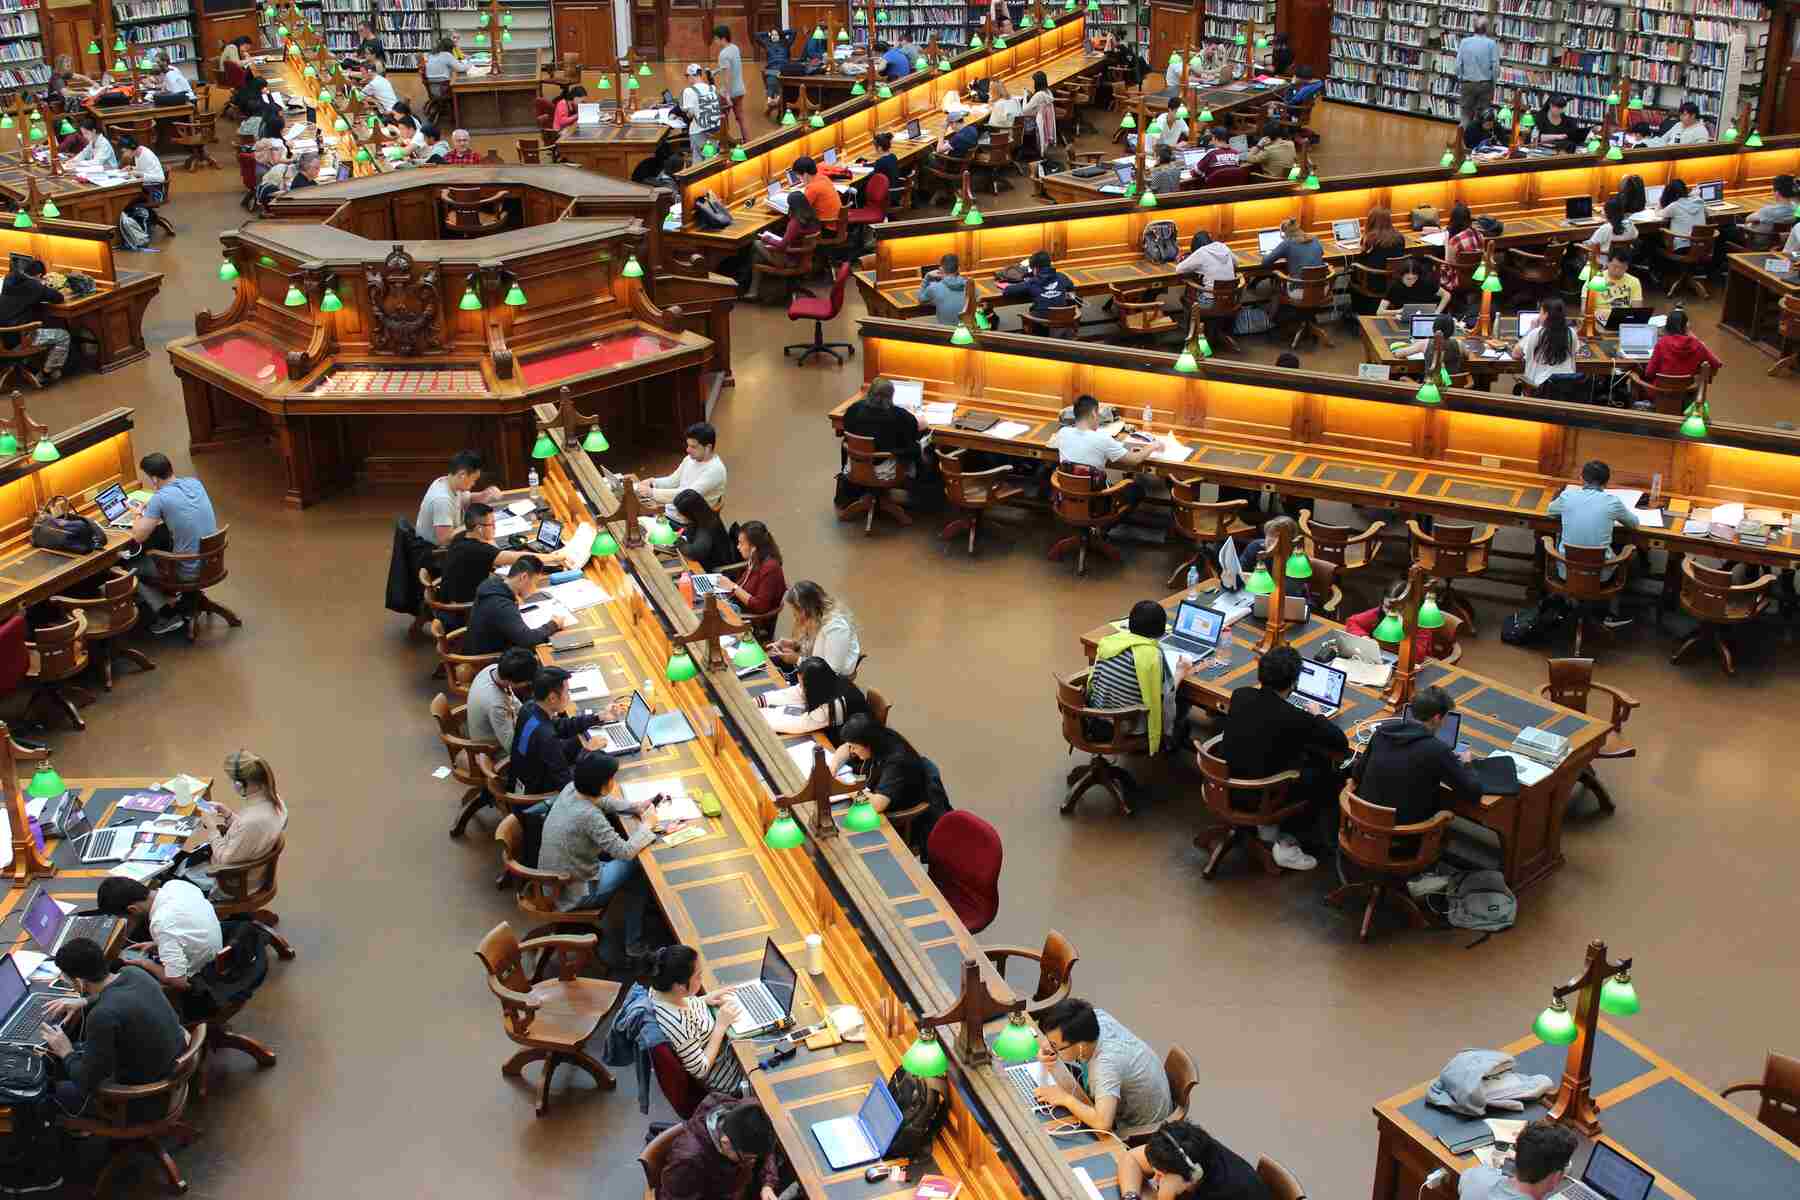 Library filled with students sitting on long tables